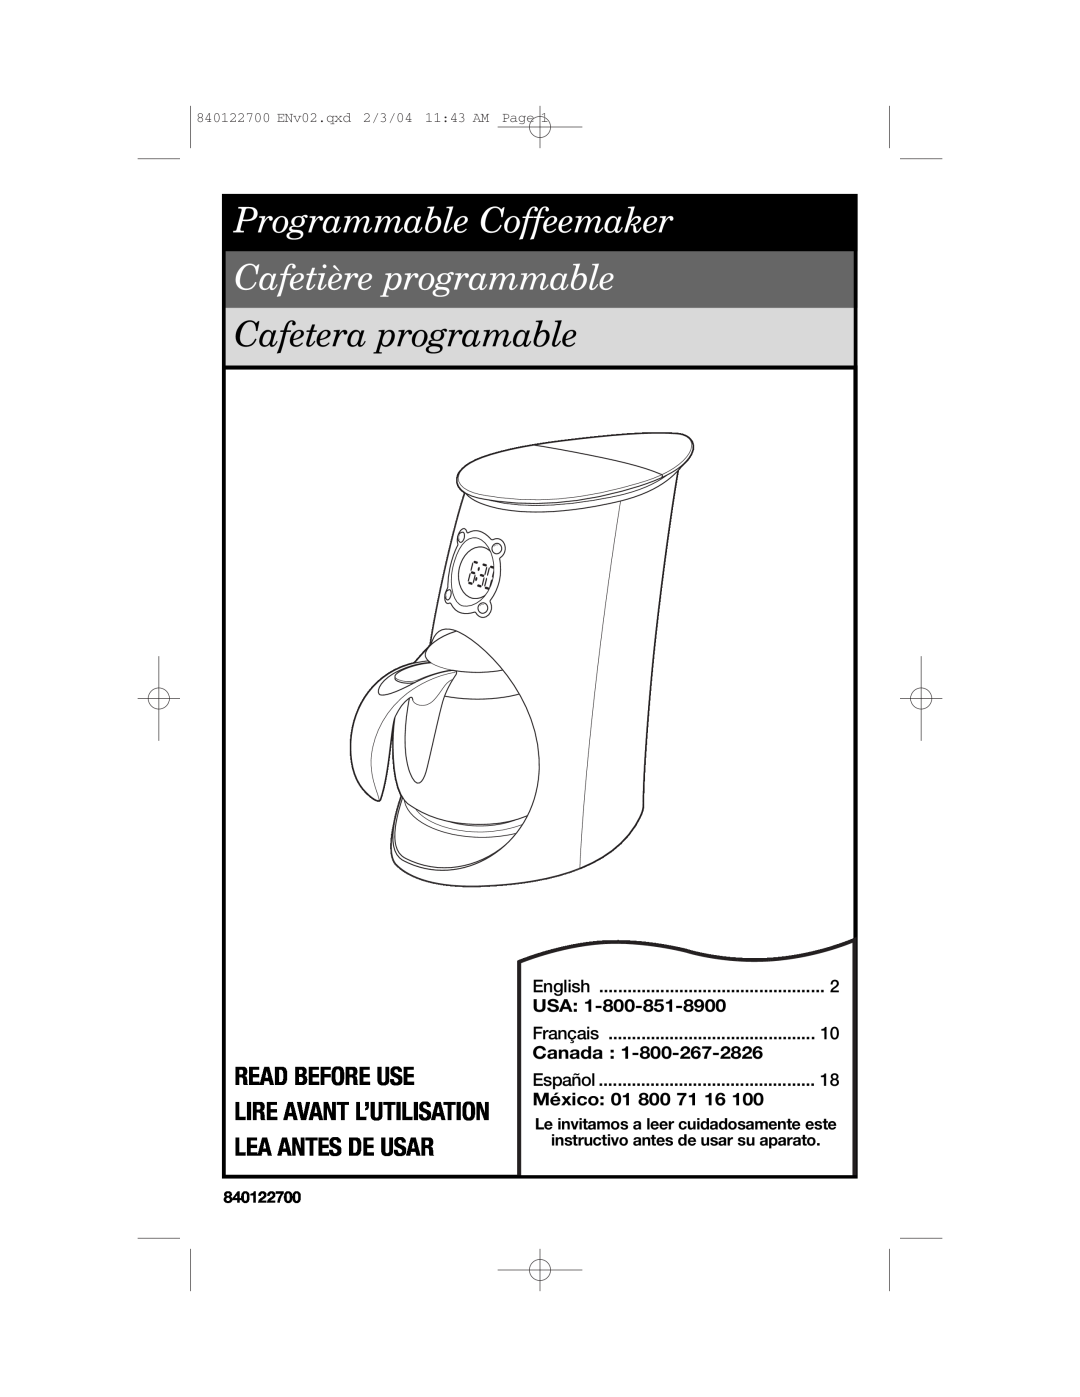 Hamilton Beach Coffemaker manual Read Before Use, Programmable Coffeemaker Cafetière programmable, Cafetera programable 